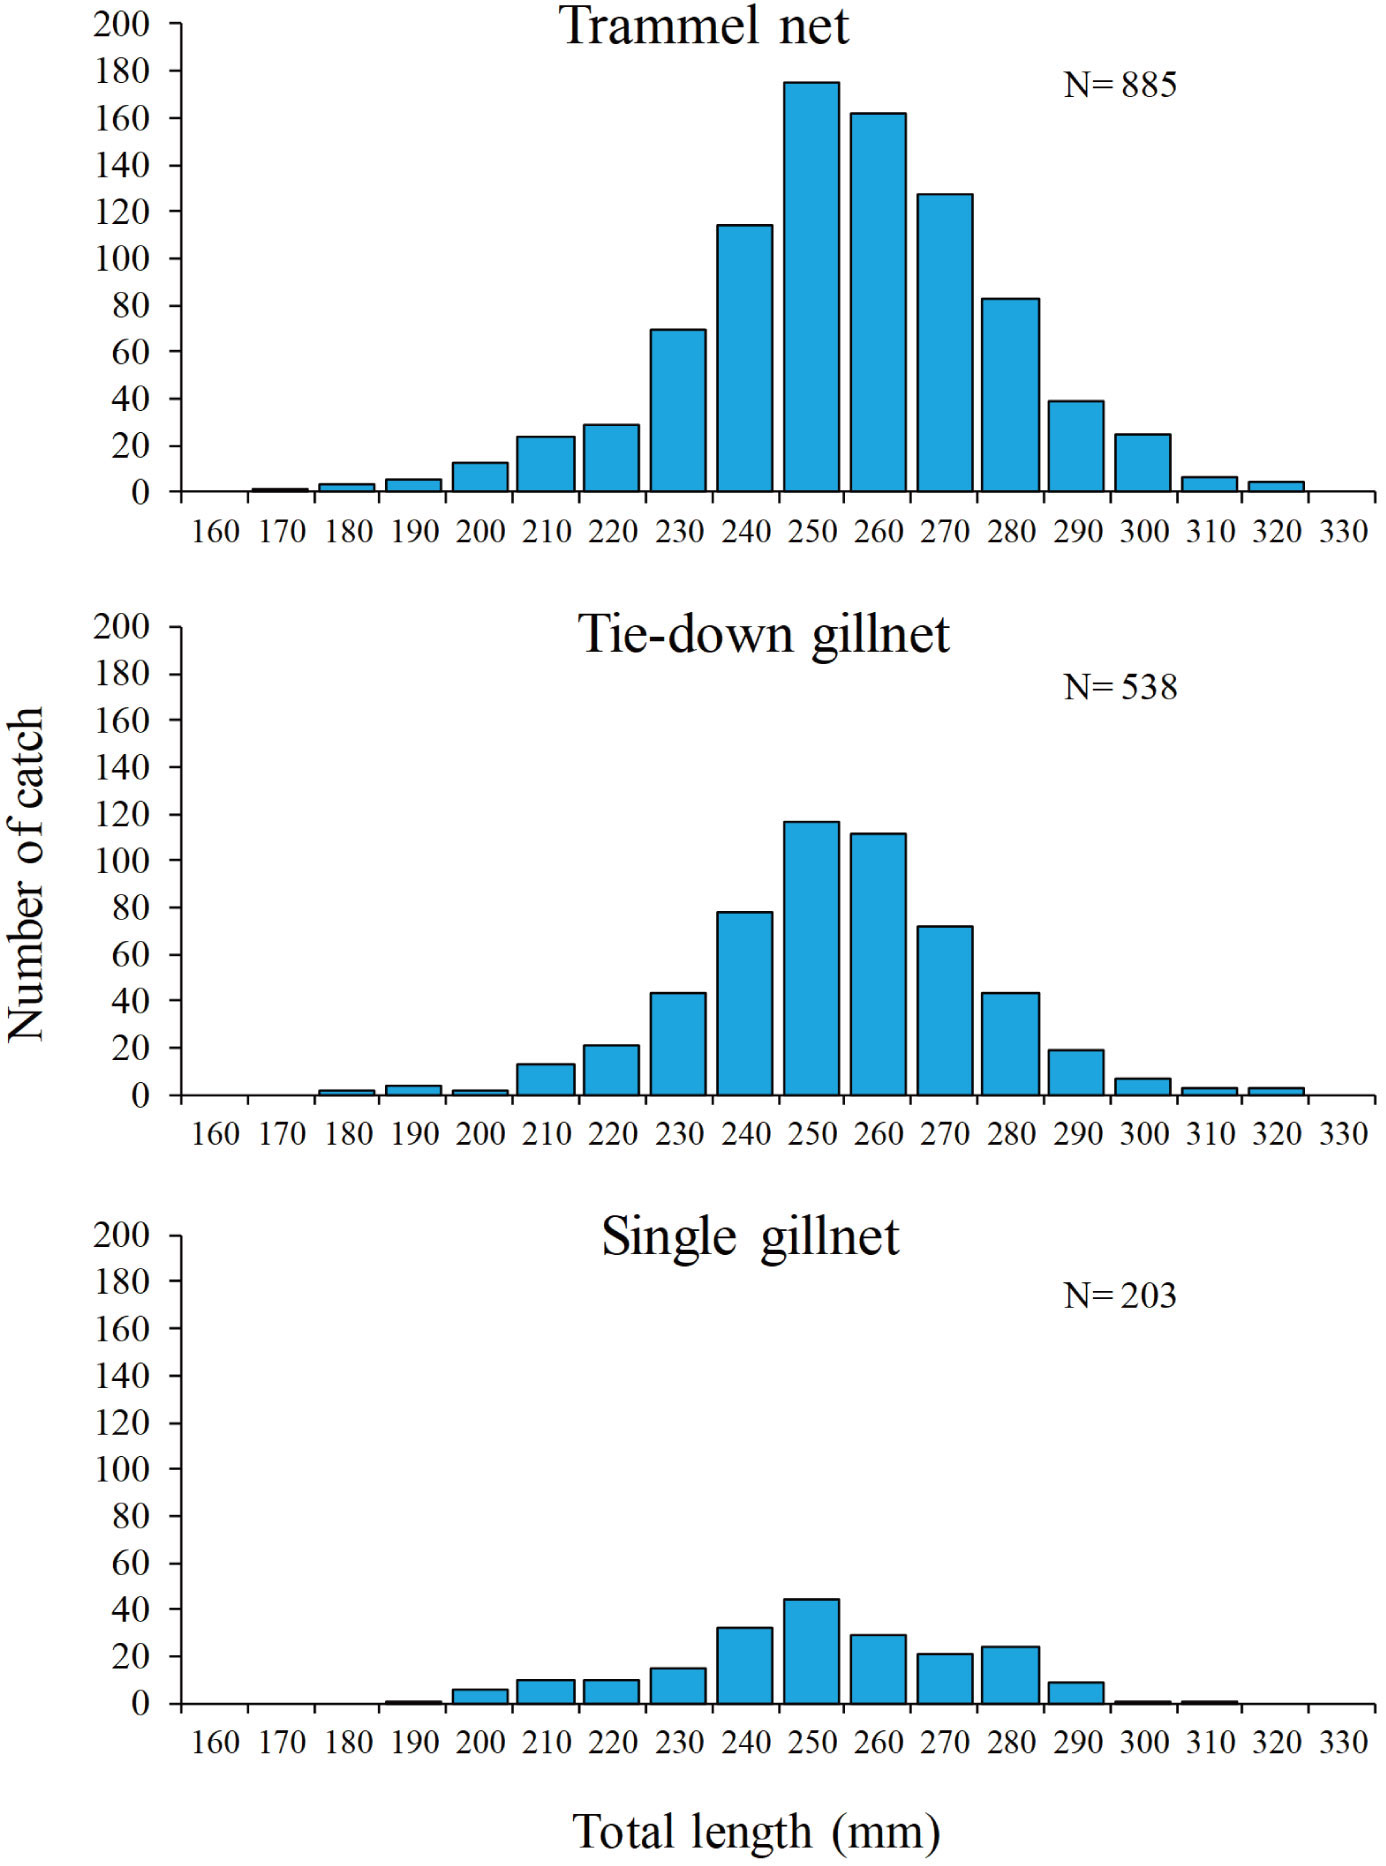 Frontiers  The application of tie-down gillnet to improve the capture of  blackfin flounder (Glyptocephalus stelleri) in a sustainable way